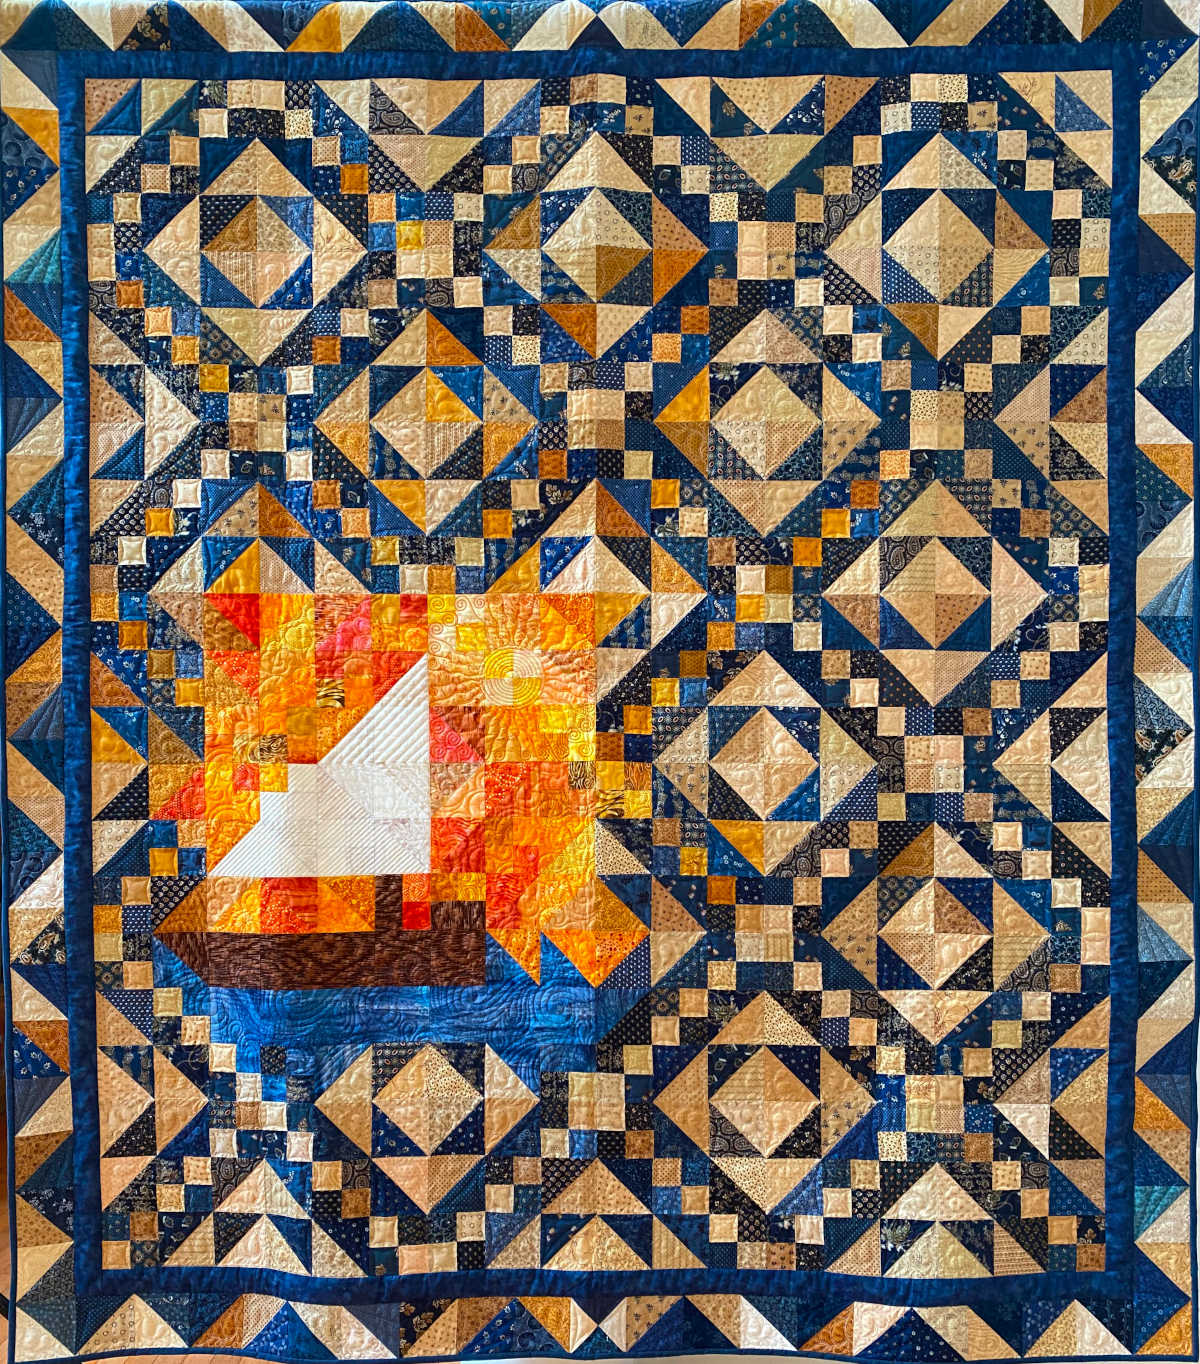 The 2022-2023 AQG raffle quilt, "Sunset Sail," was designed and made by Hilke Hoefer, Carolyn Dixson, Jane Mullenix and Joy Coffelt. Custom quilting by Joy Coffelt.